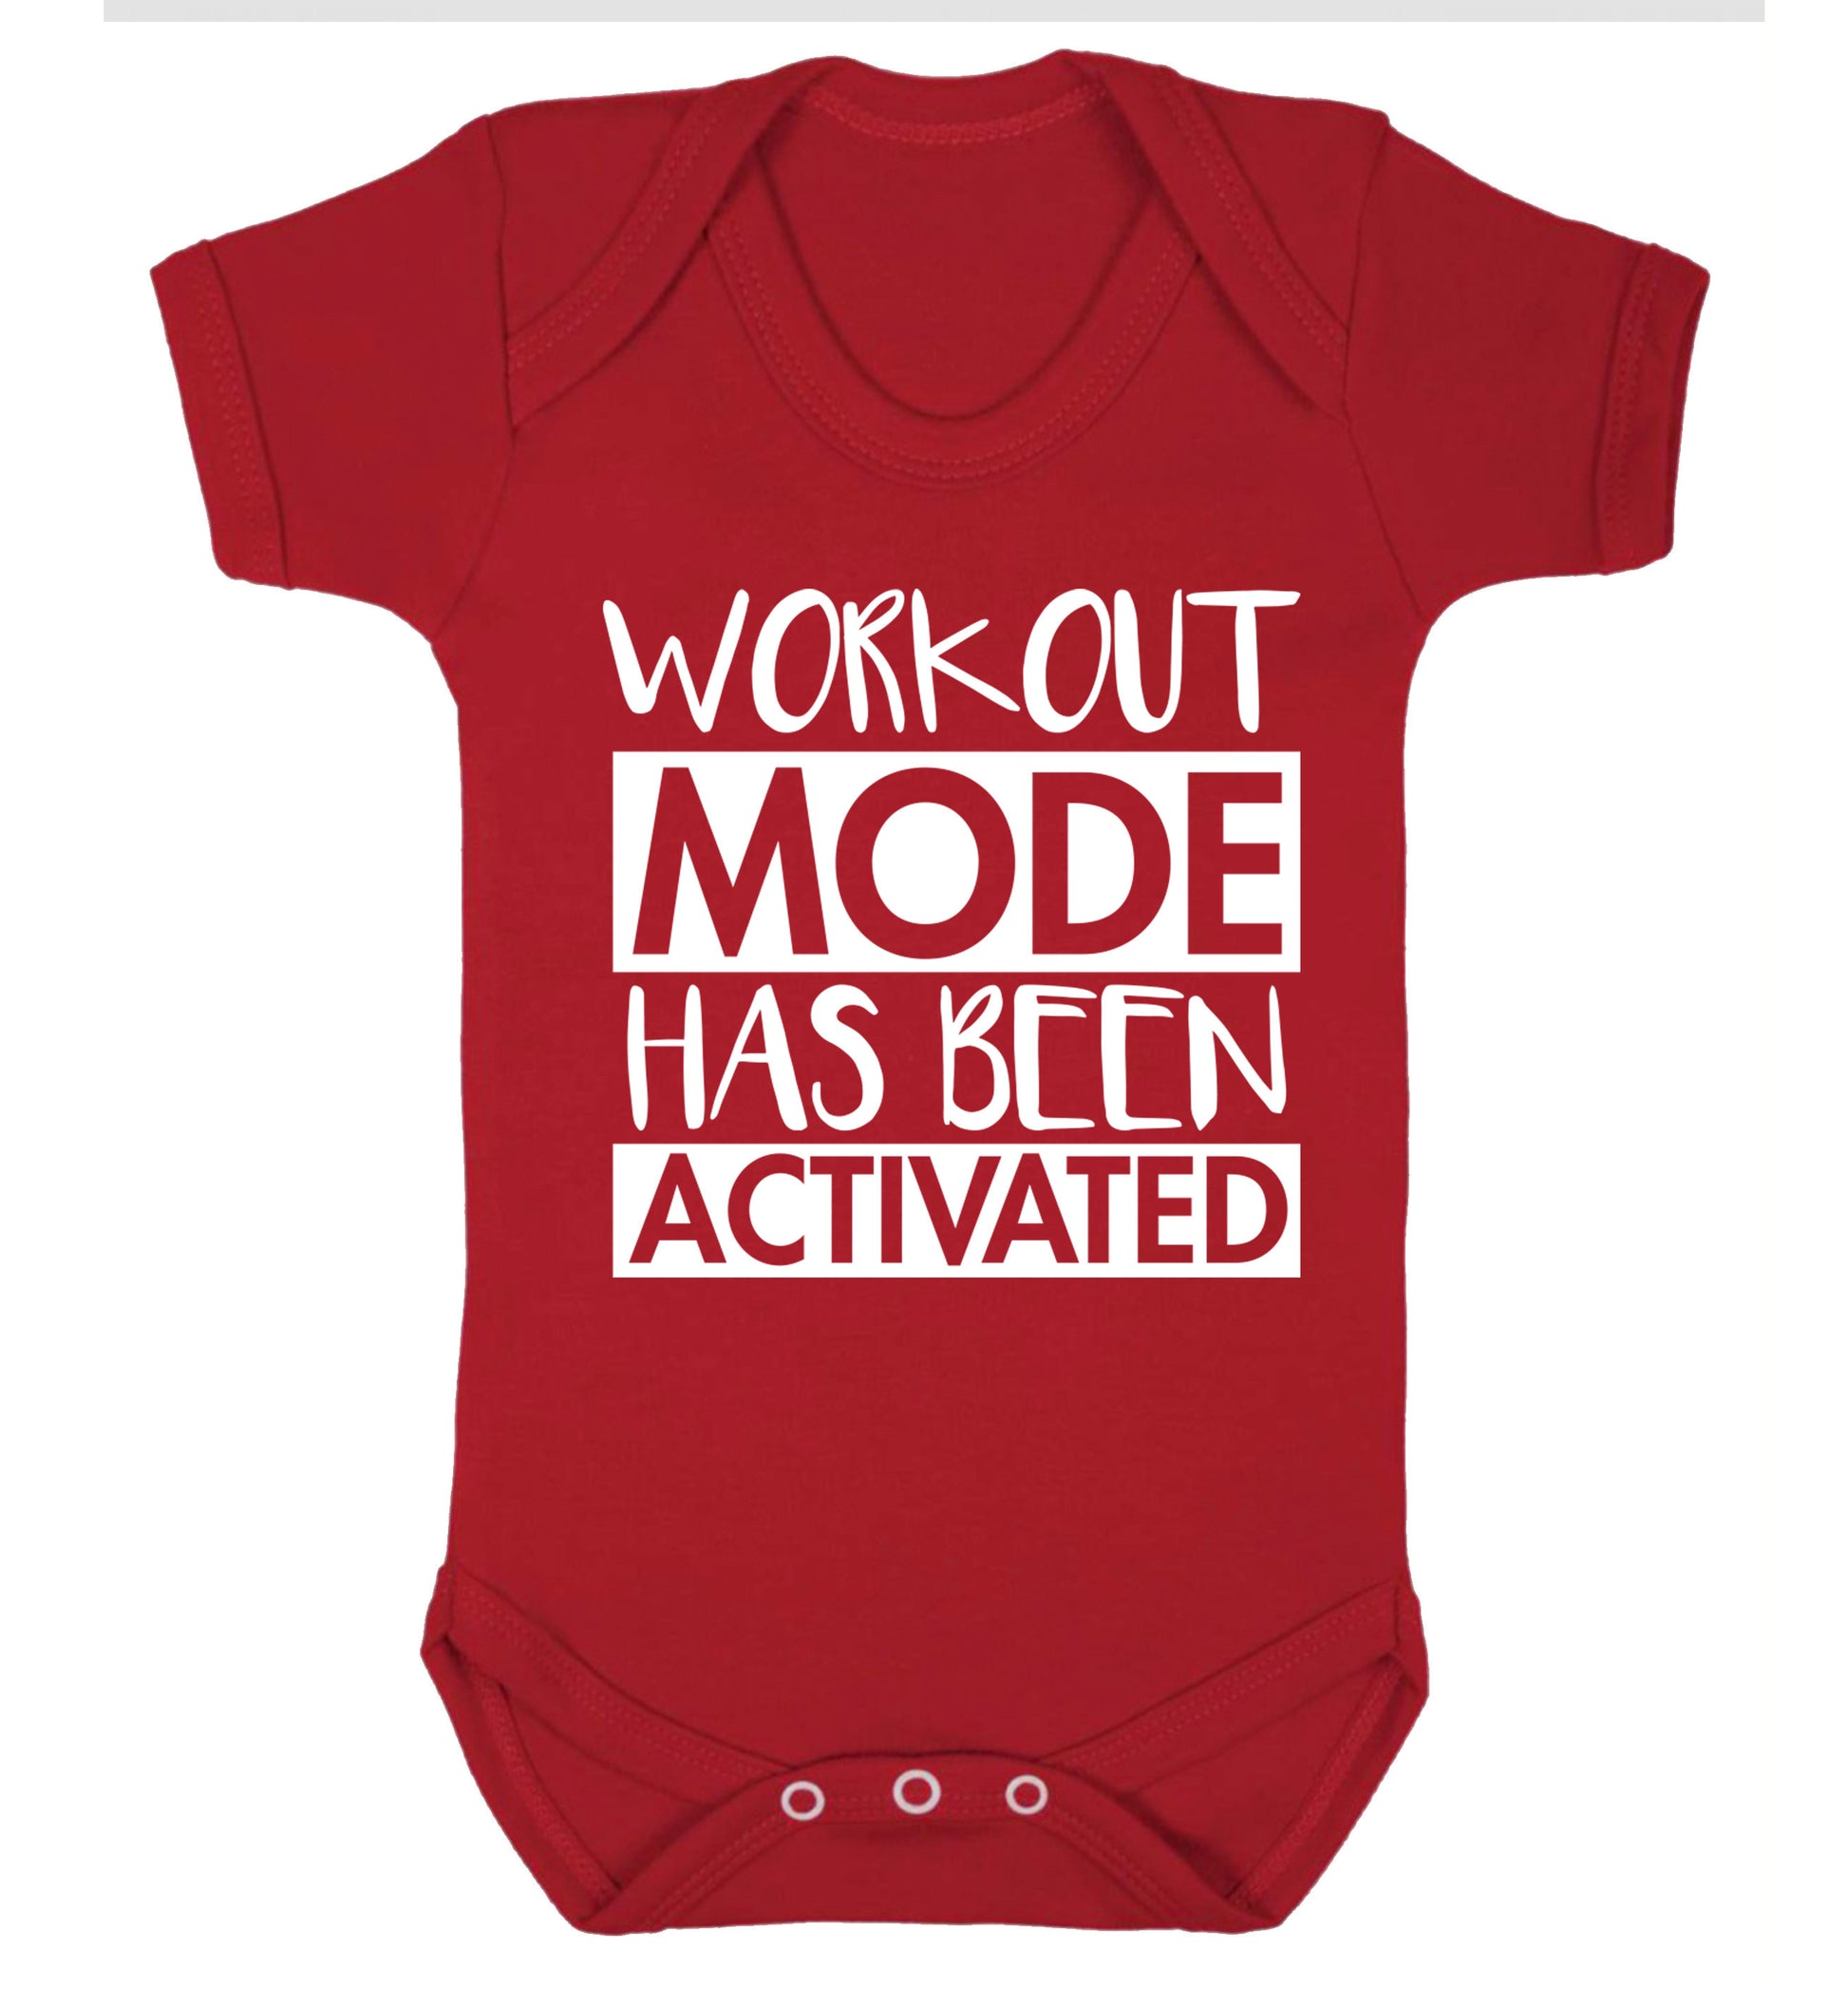 Workout mode has been activated Baby Vest red 18-24 months